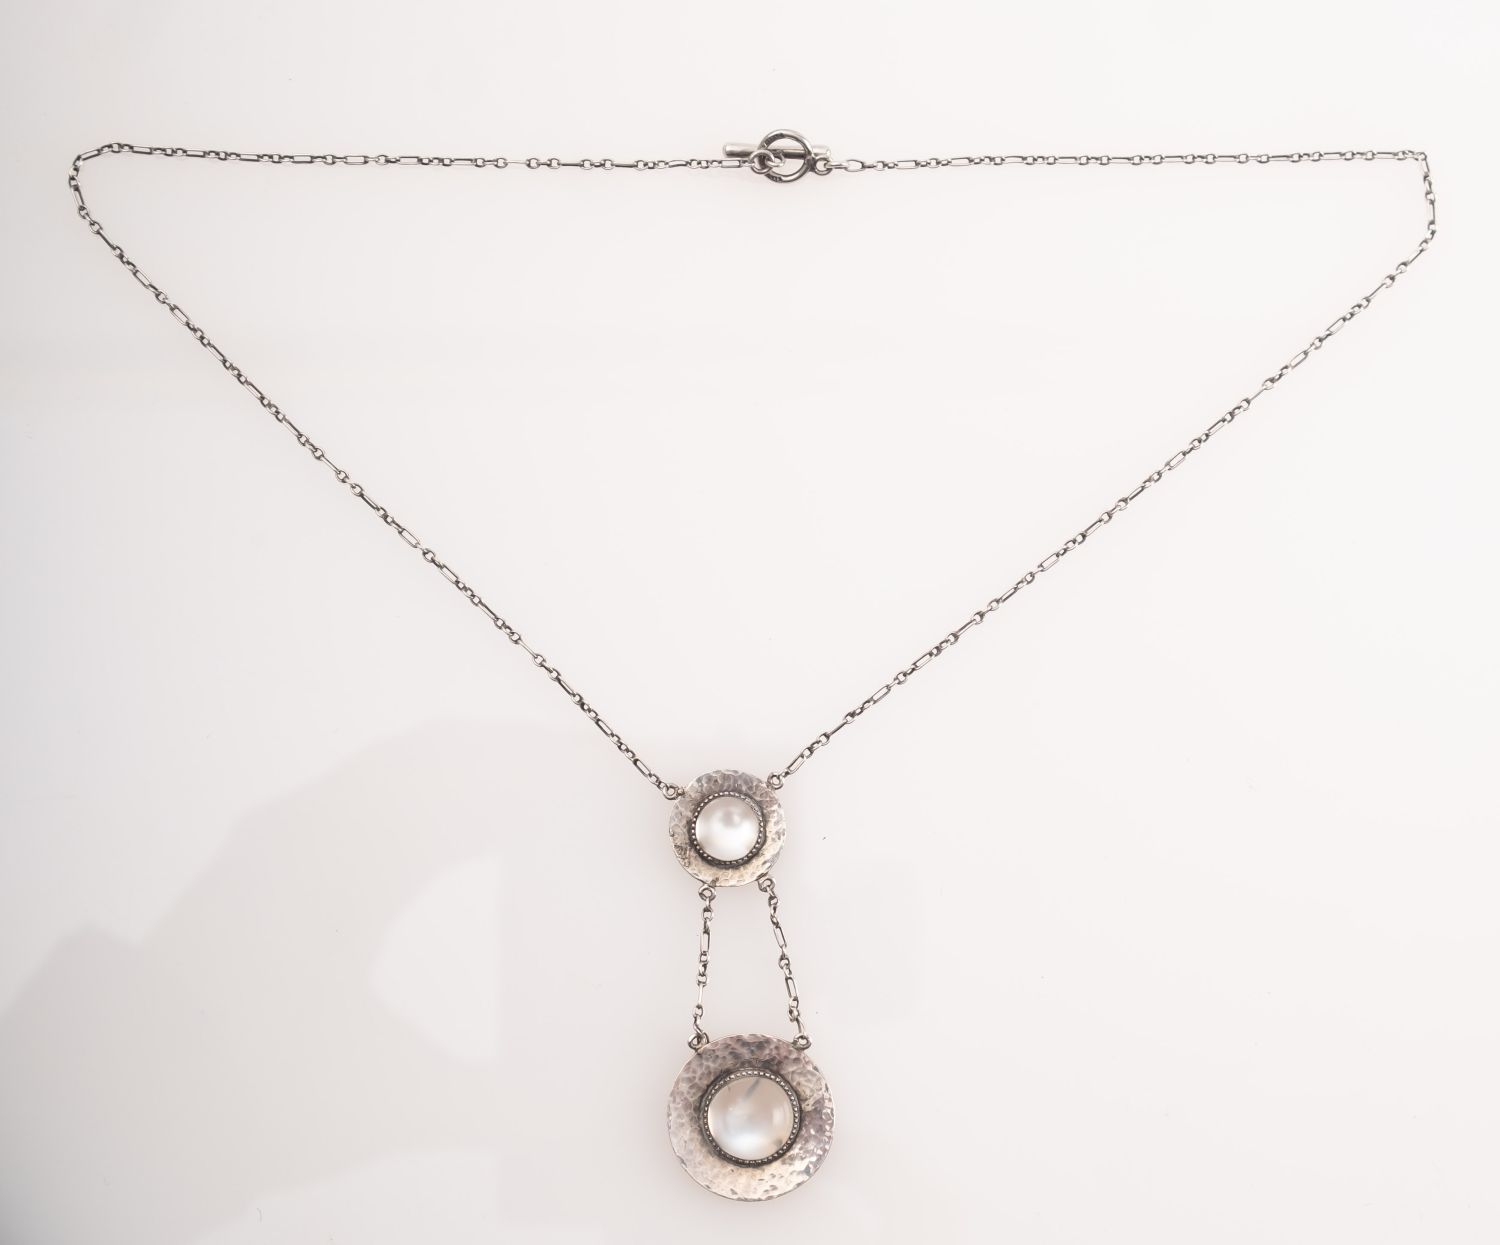 Murrle Bennett, an Arts & Crafts moonstone necklace, - Image 2 of 2